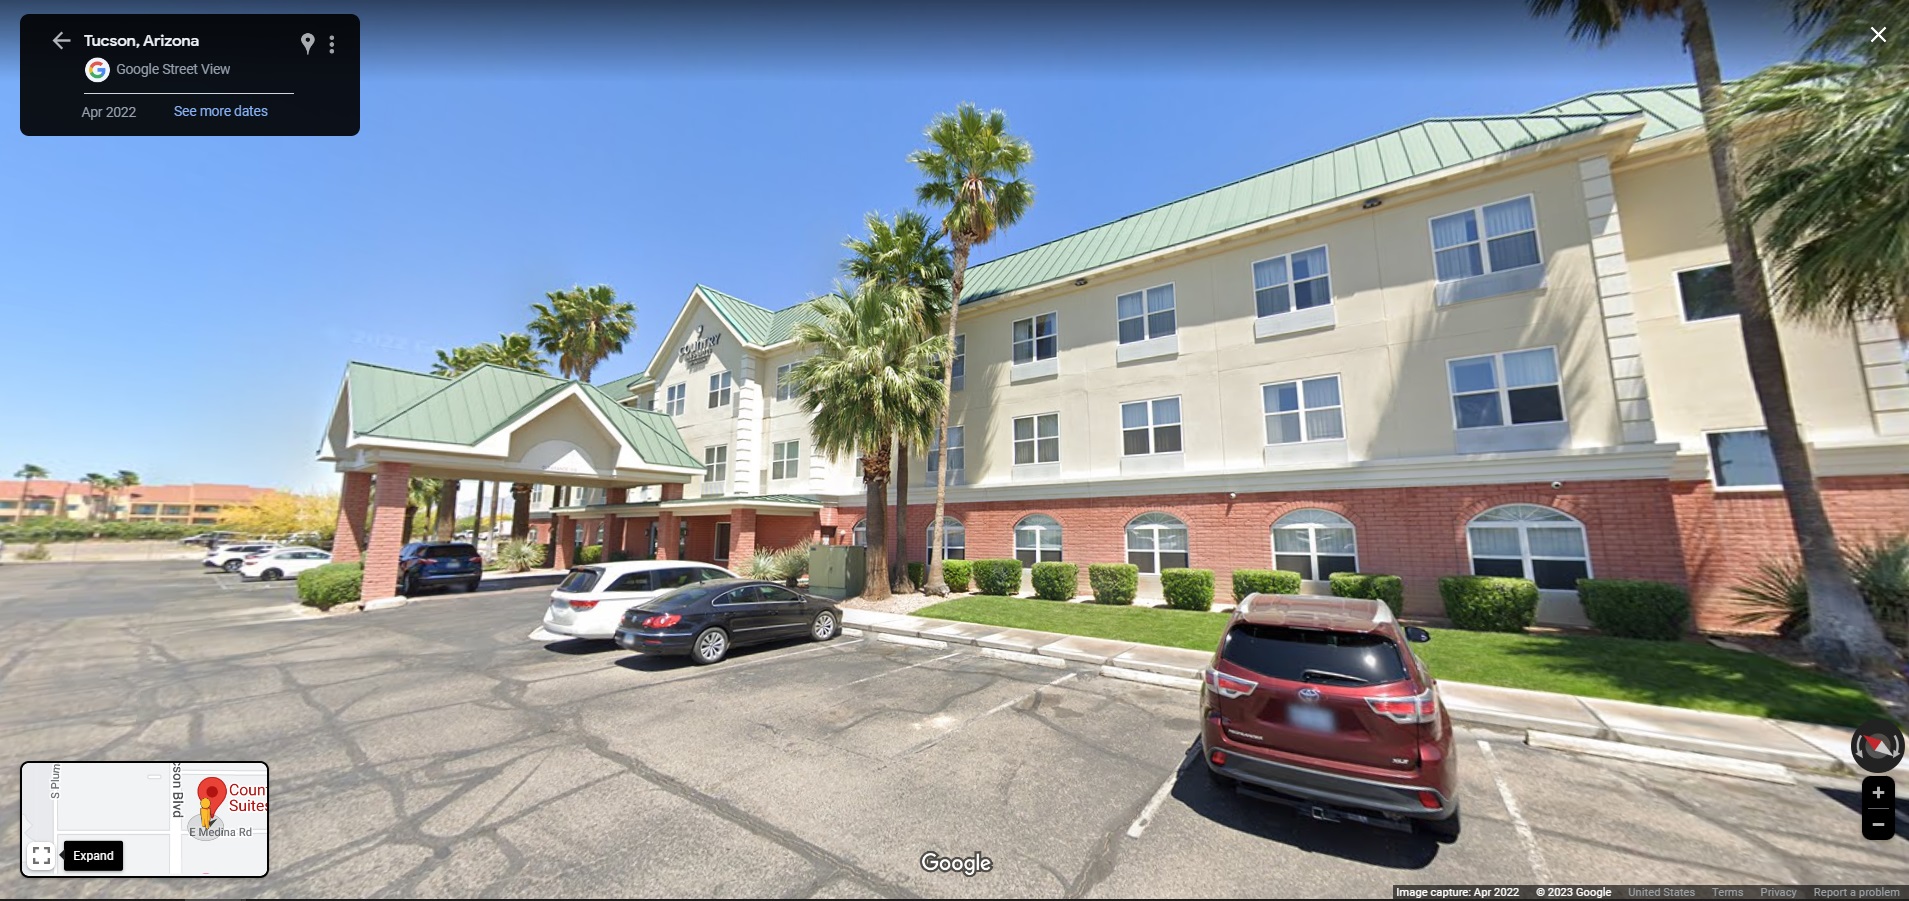 Country Inn & Suites Tucson Airport on Google Street View